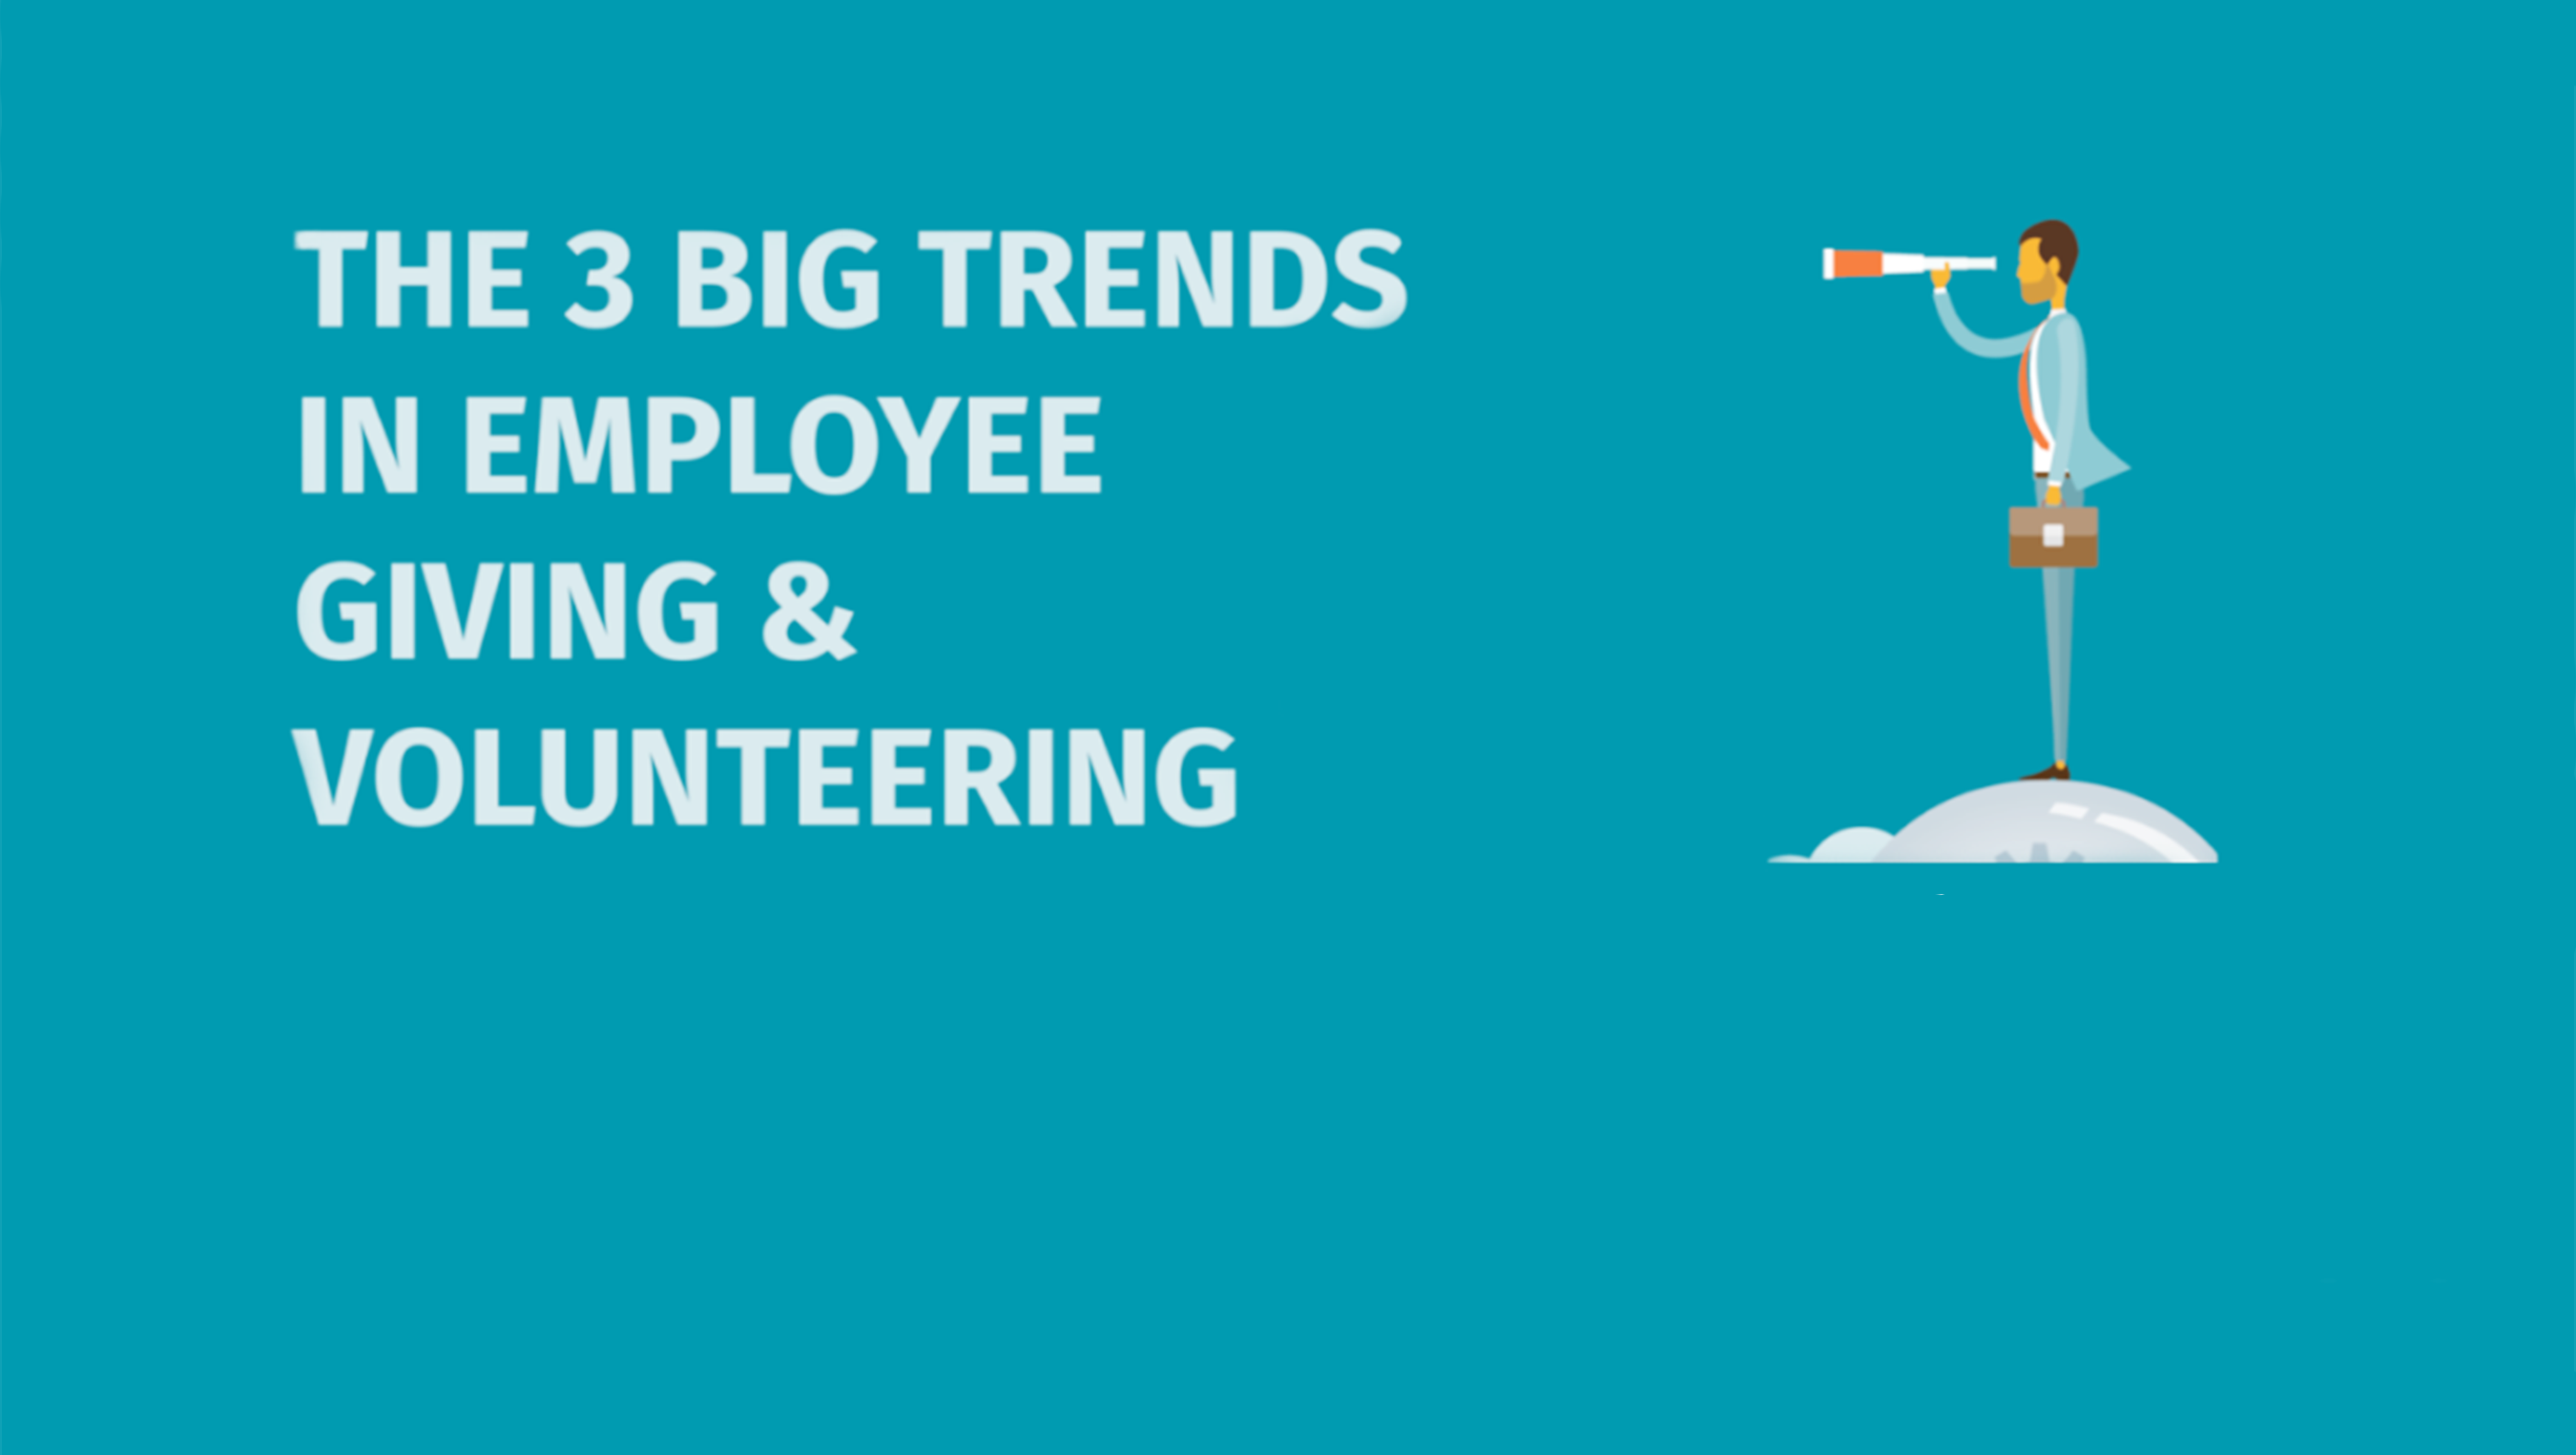 The 3 Big Trends in Employee Giving and Volunteering Realized Worth